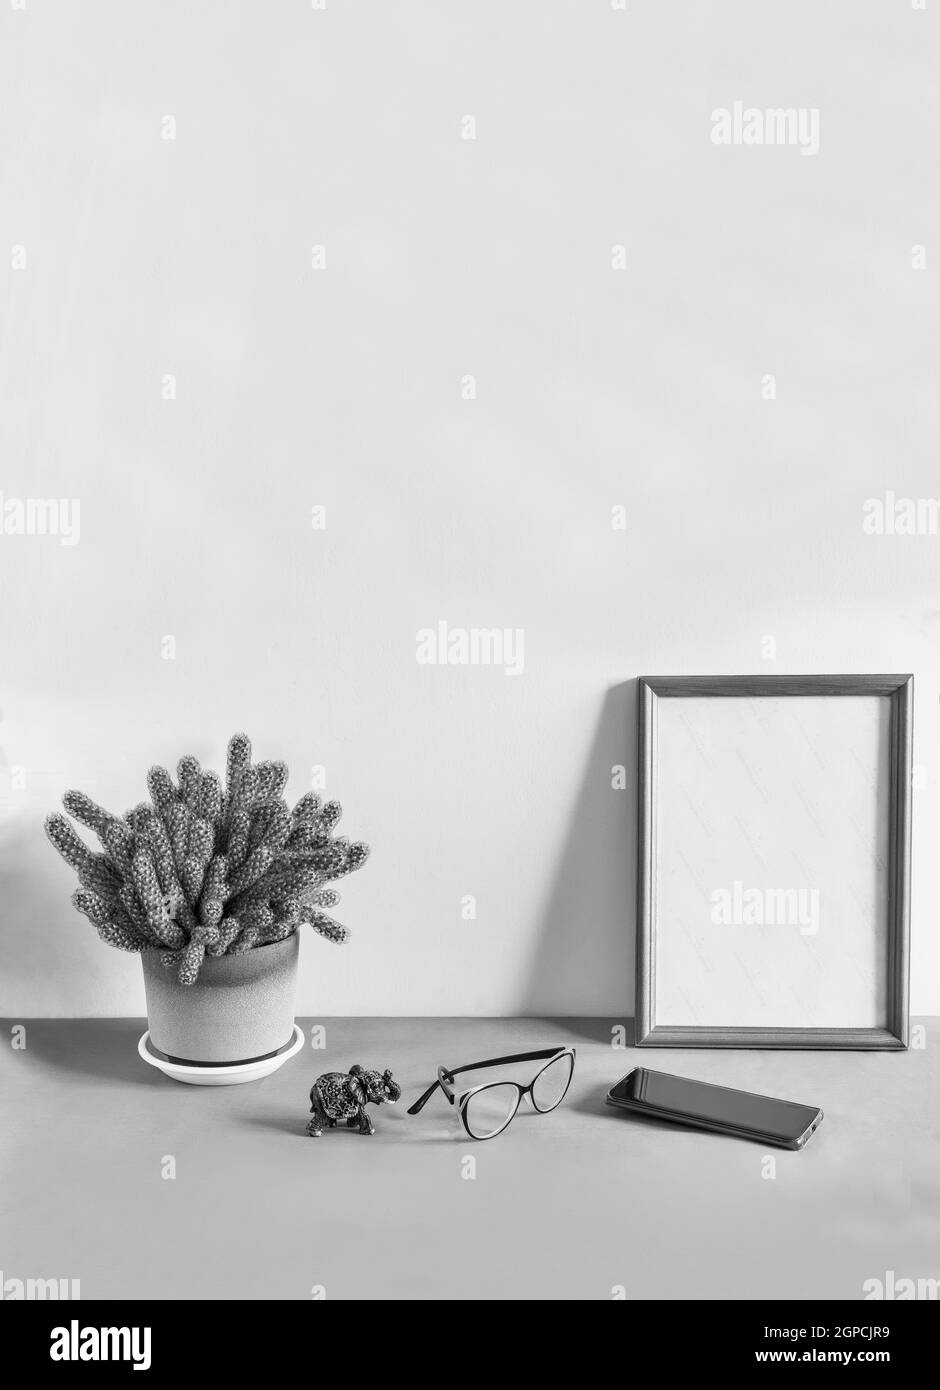 On a table against a white wall is a wooden photo frame and a potted cactus flower. Next to it are glasses and a smartphone. Front view, copy space Stock Photo